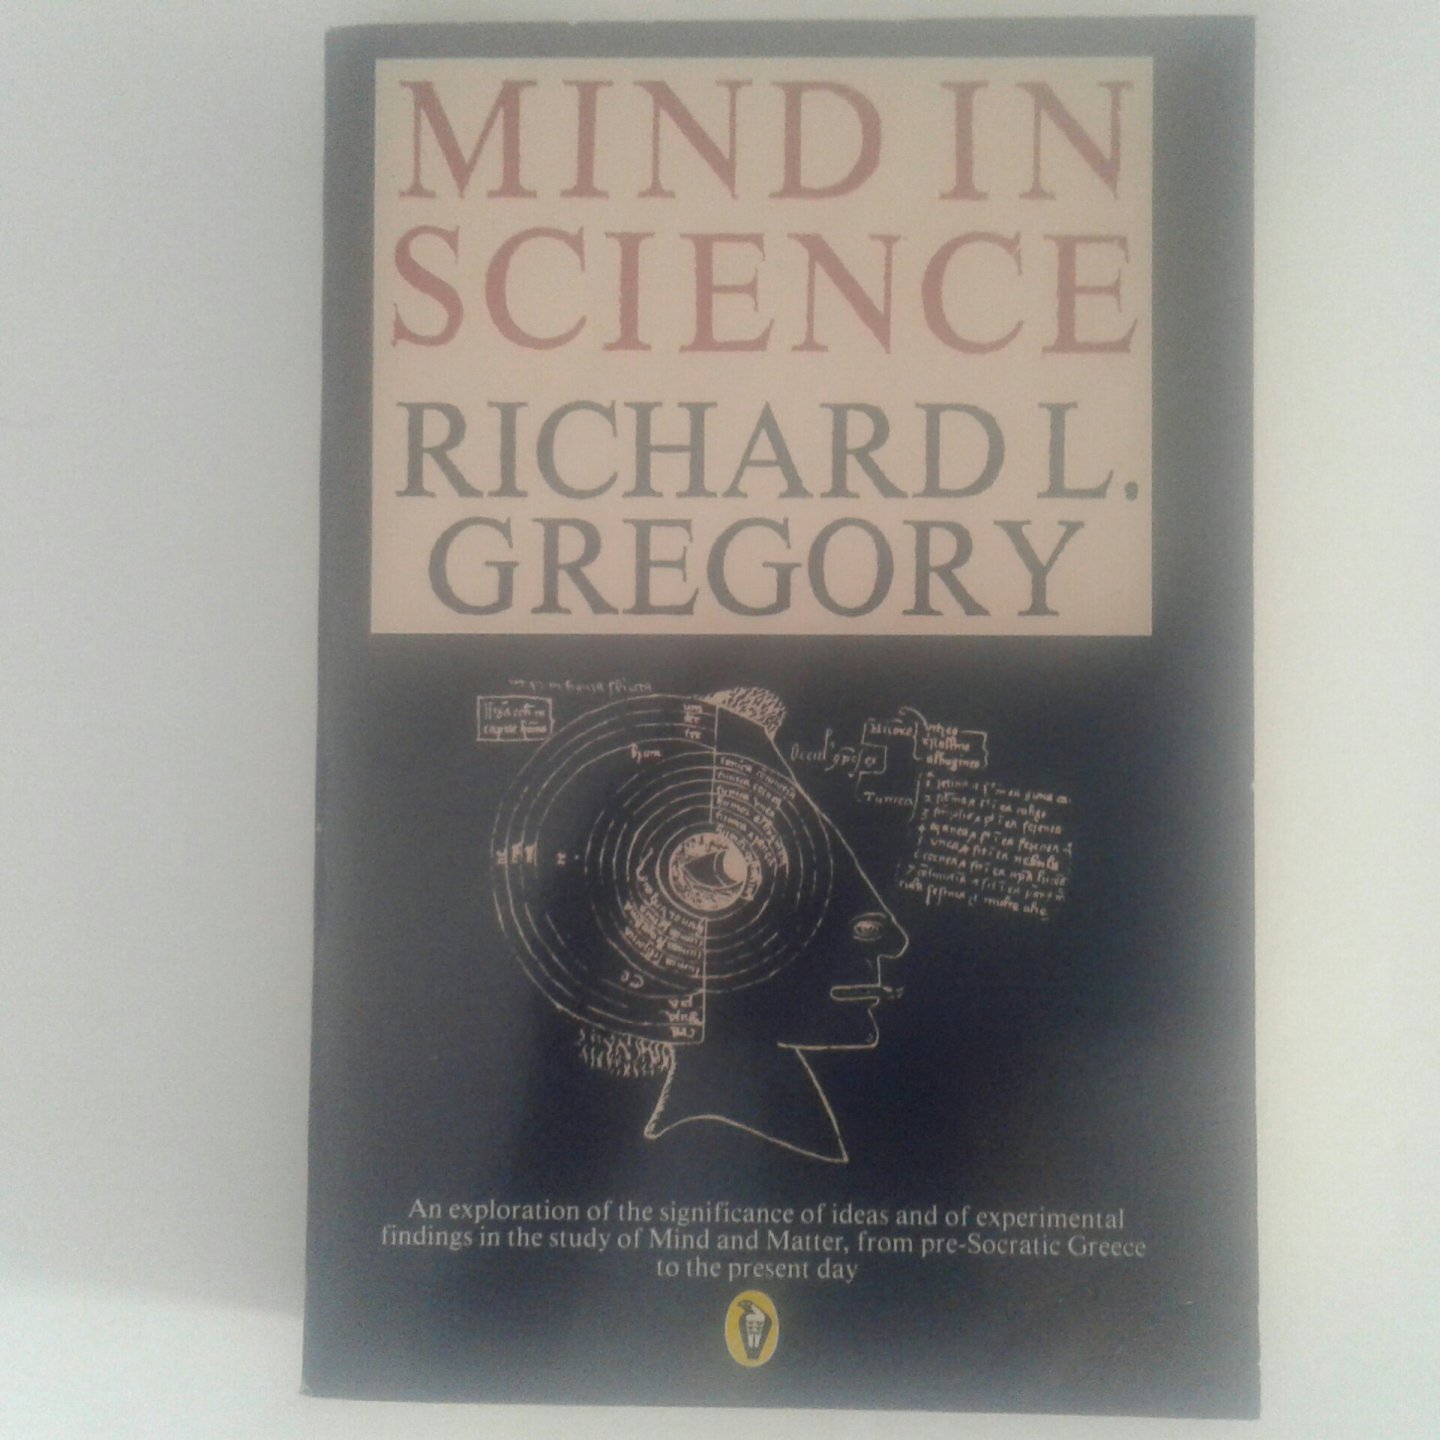 Gregory, Richard L. - Mind in Science ; A history of explanations in psychology and physics